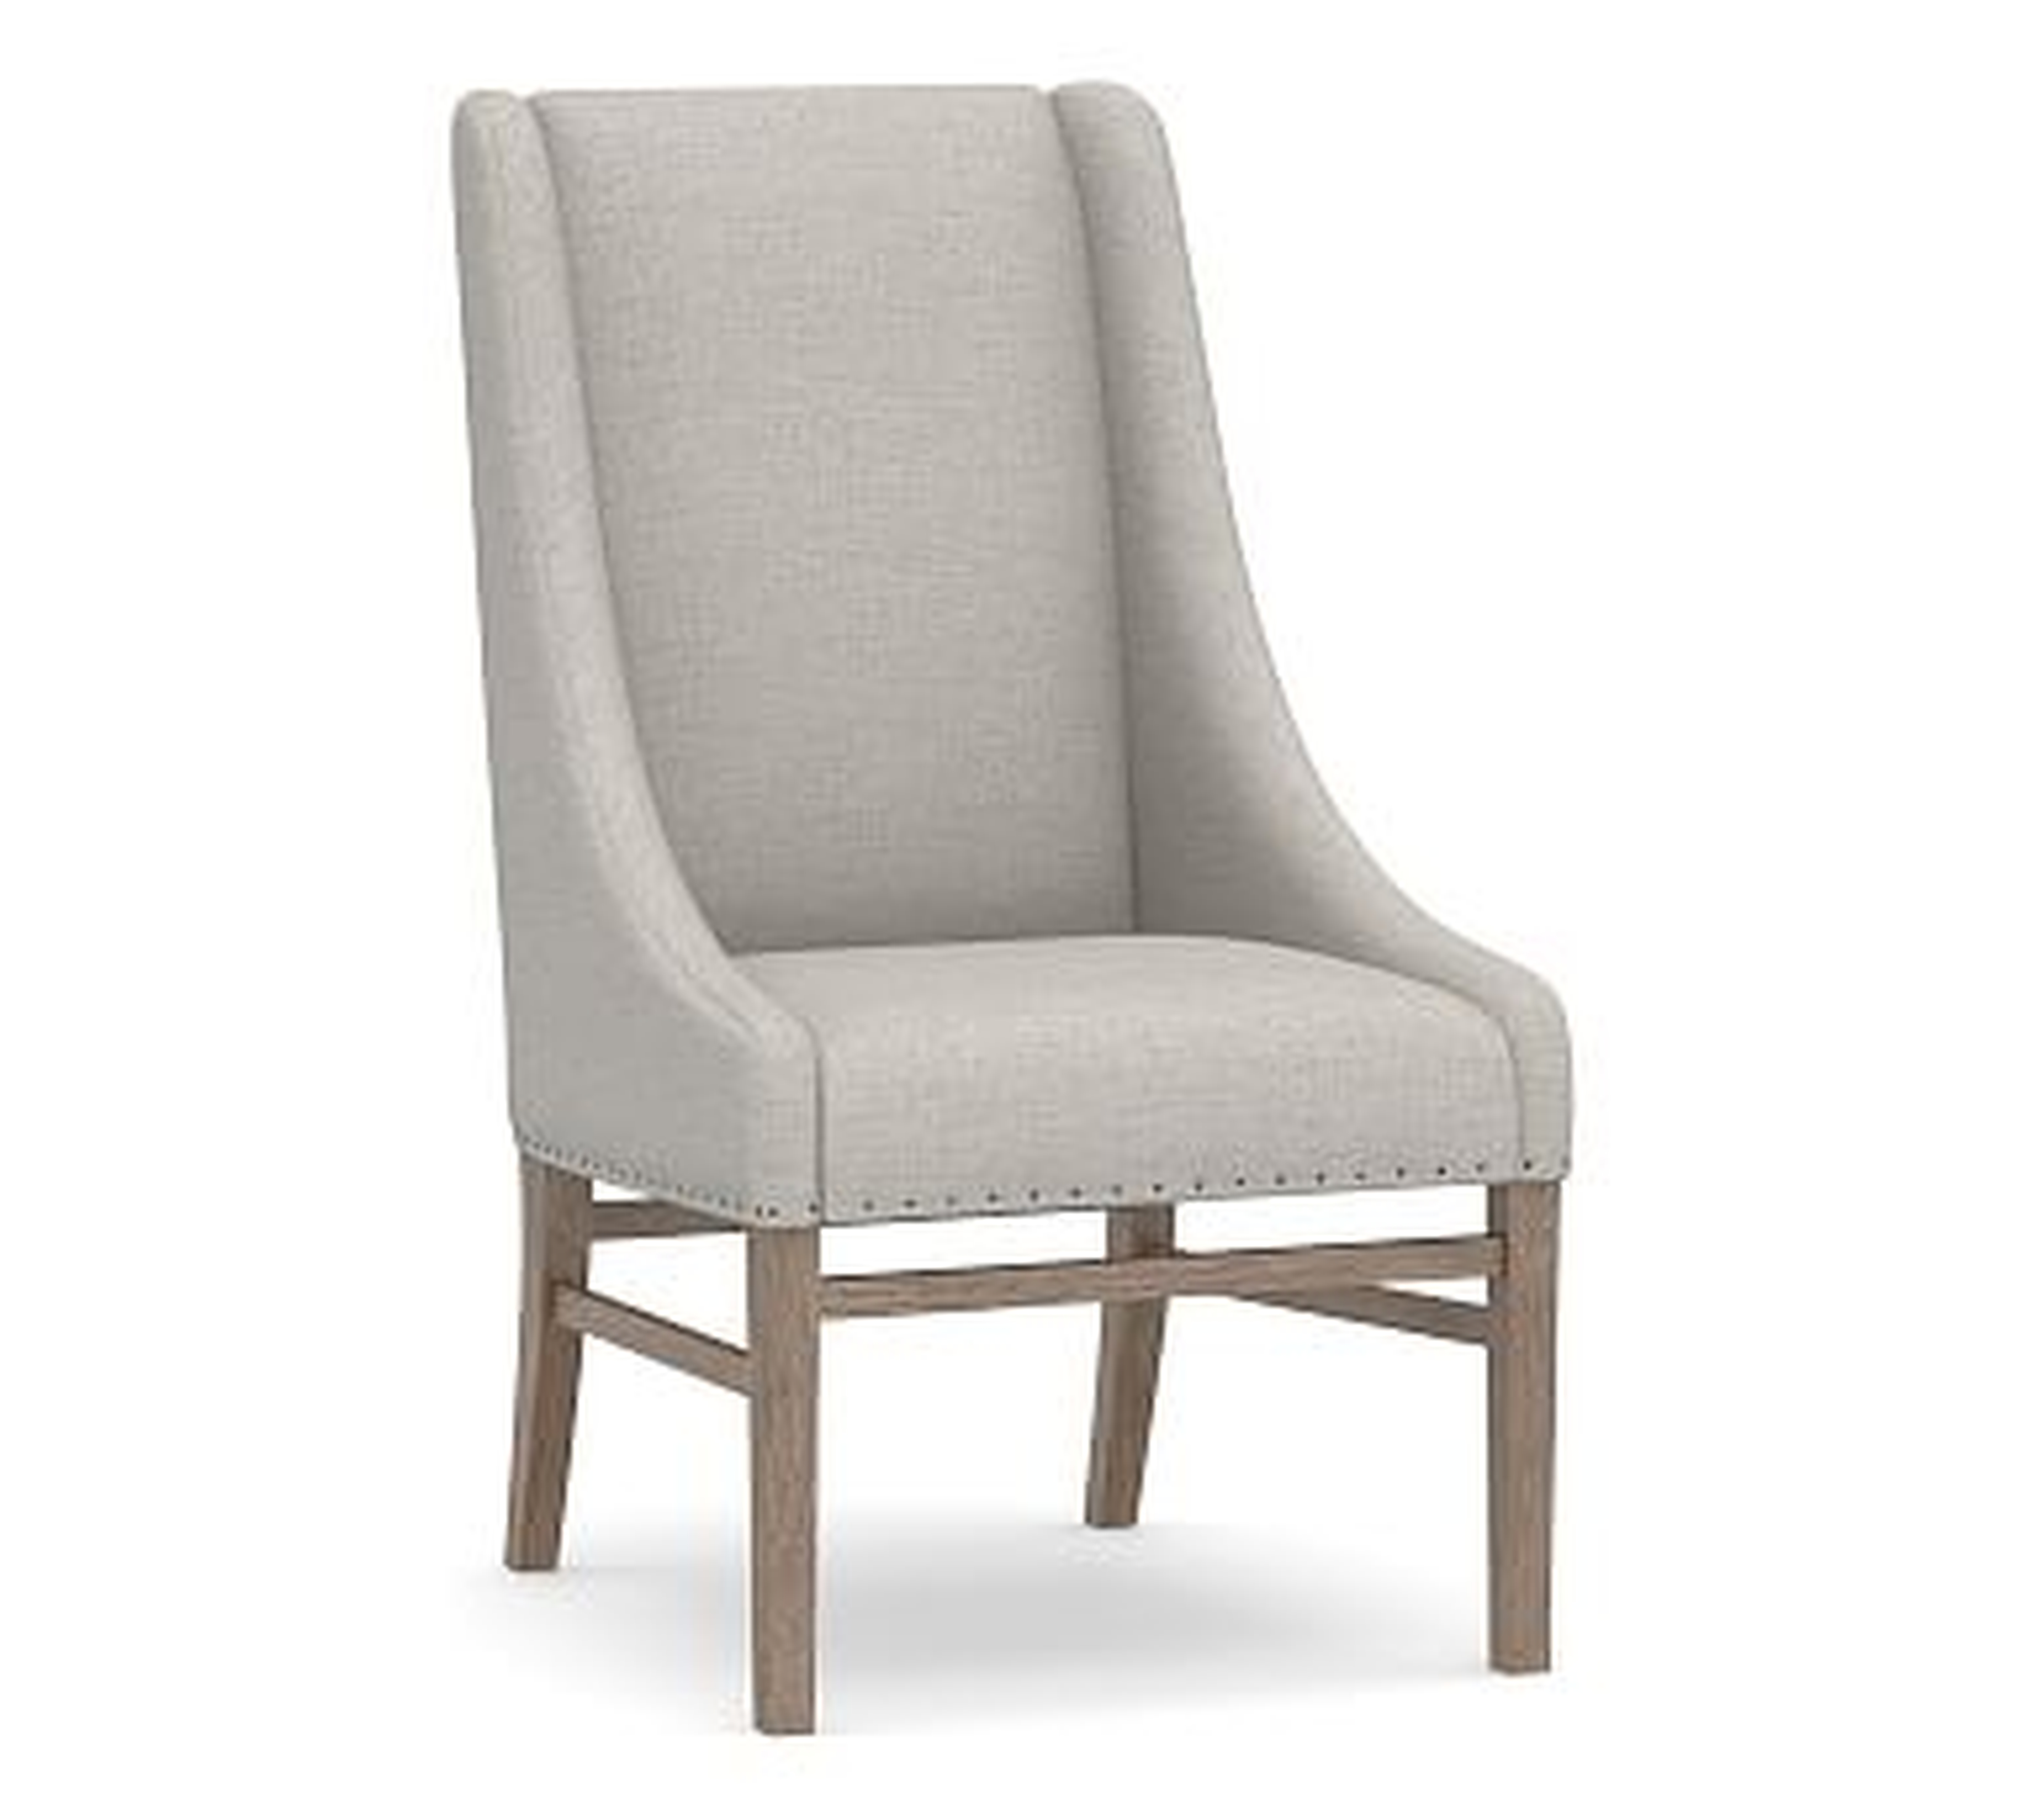 Milan Slope Arm Upholstered Dining Side Chair, Gray Wash Leg, Heathered Twill Stone - Pottery Barn